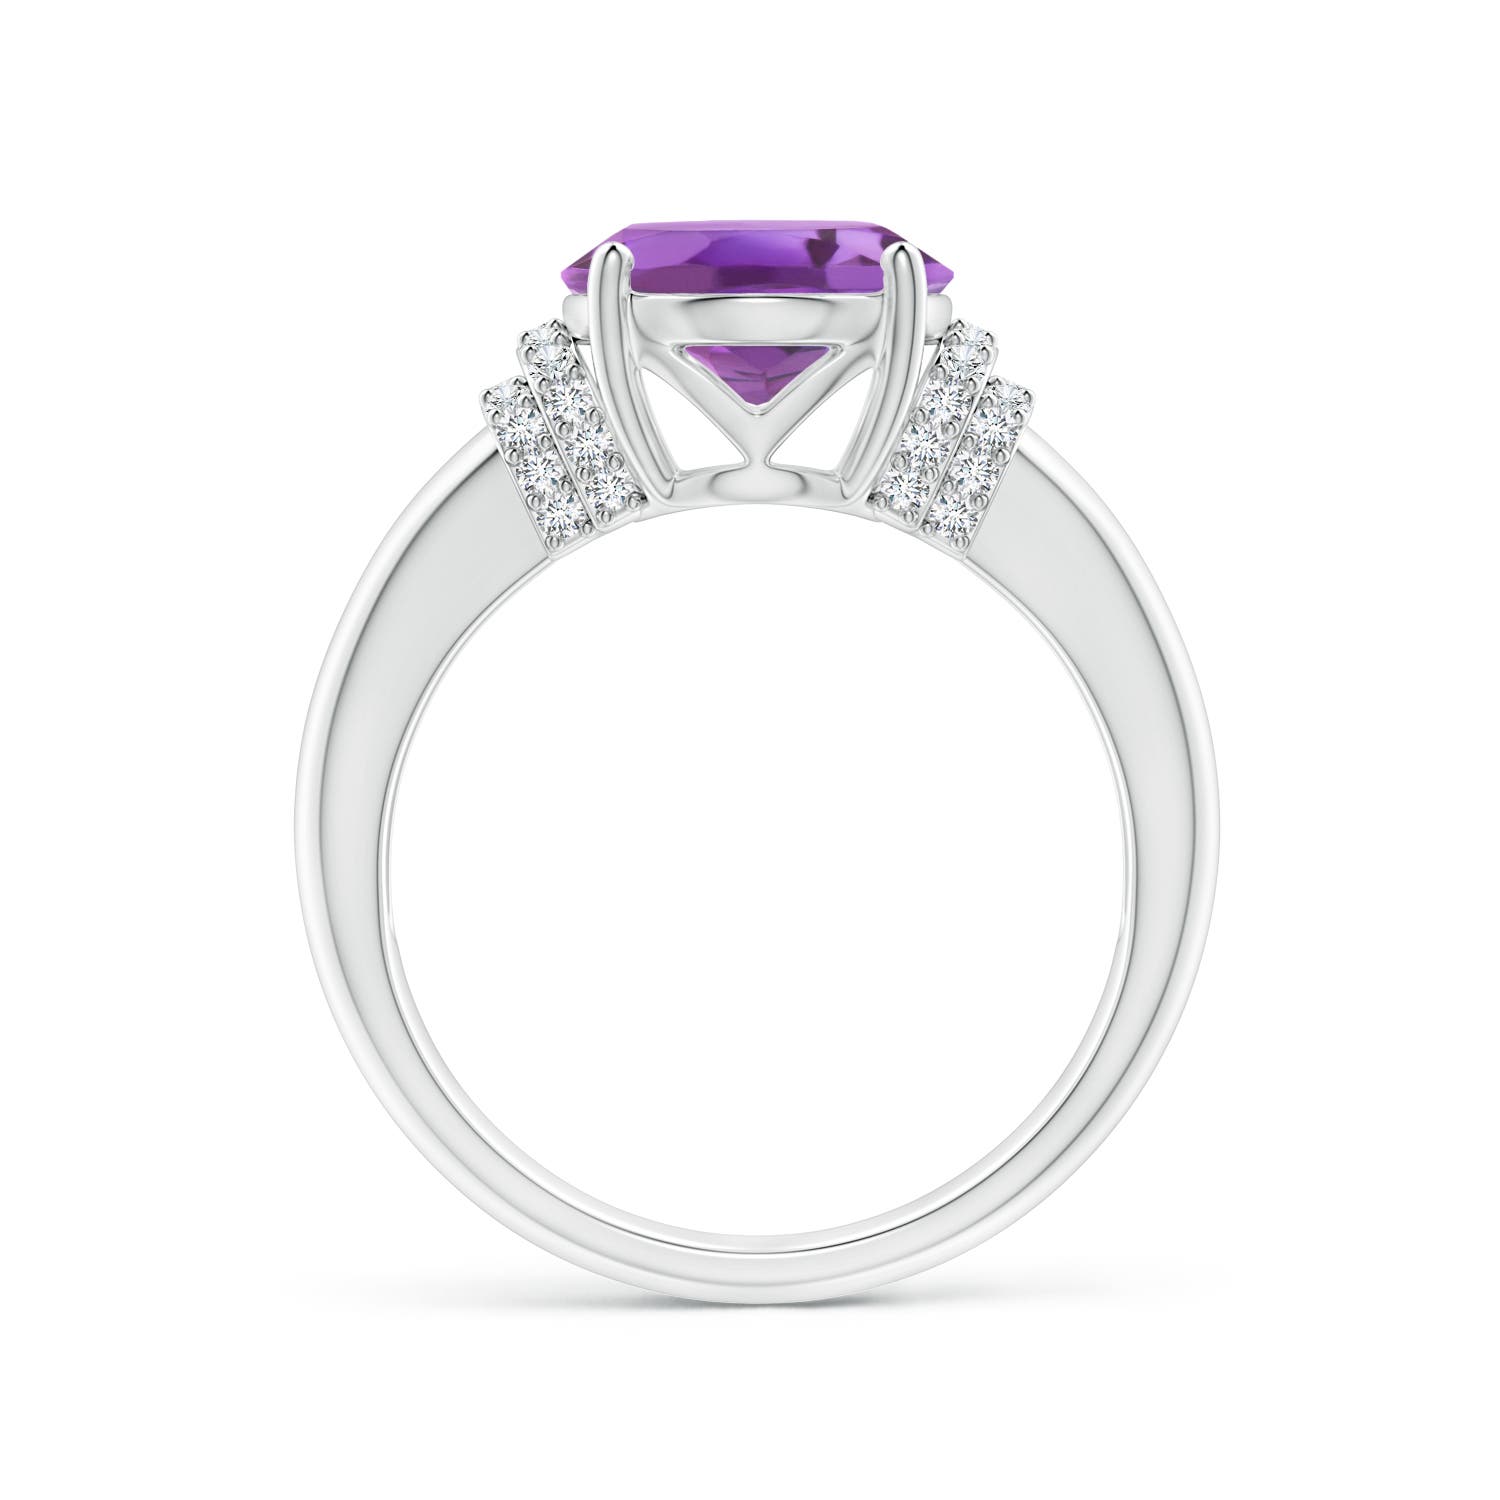 A - Amethyst / 3.35 CT / 14 KT White Gold